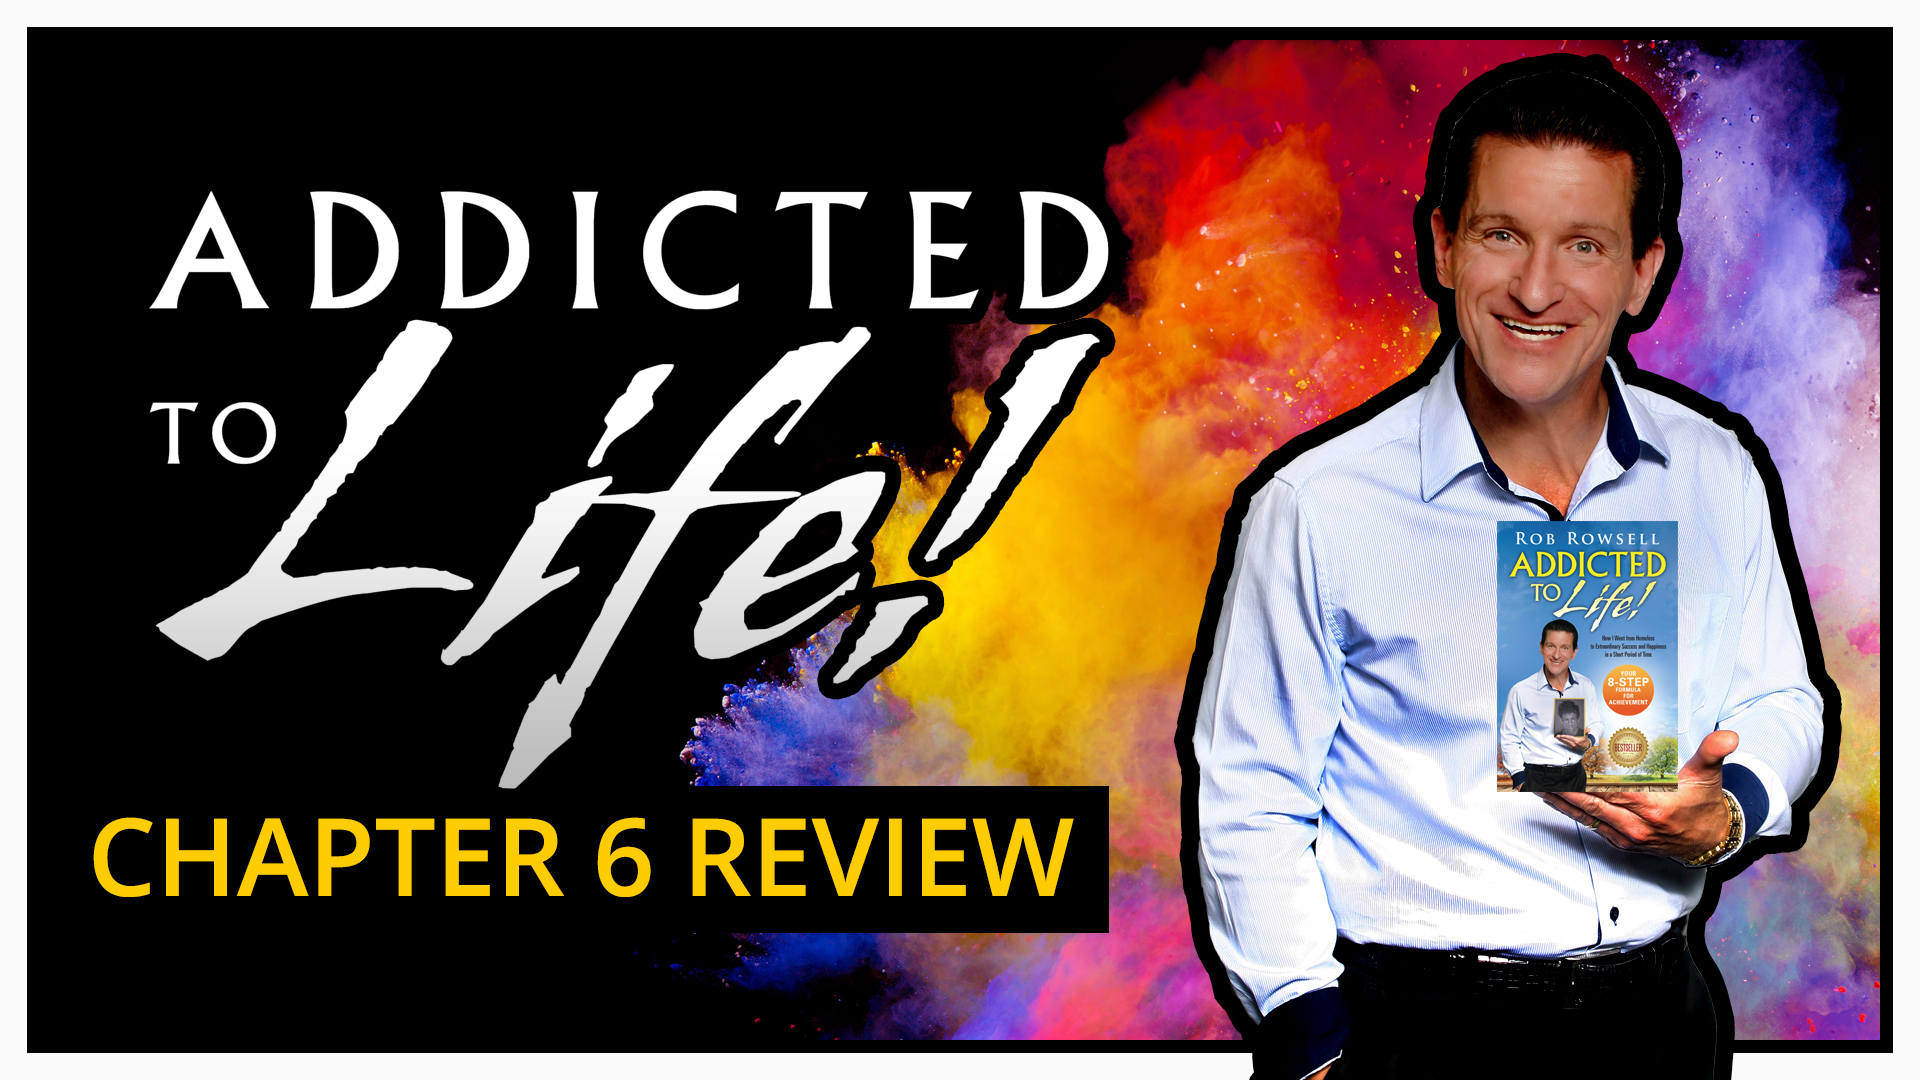 "Addicted to Life" Chapter 6 Review - You Won’t Always Feel Like You’re Winning!